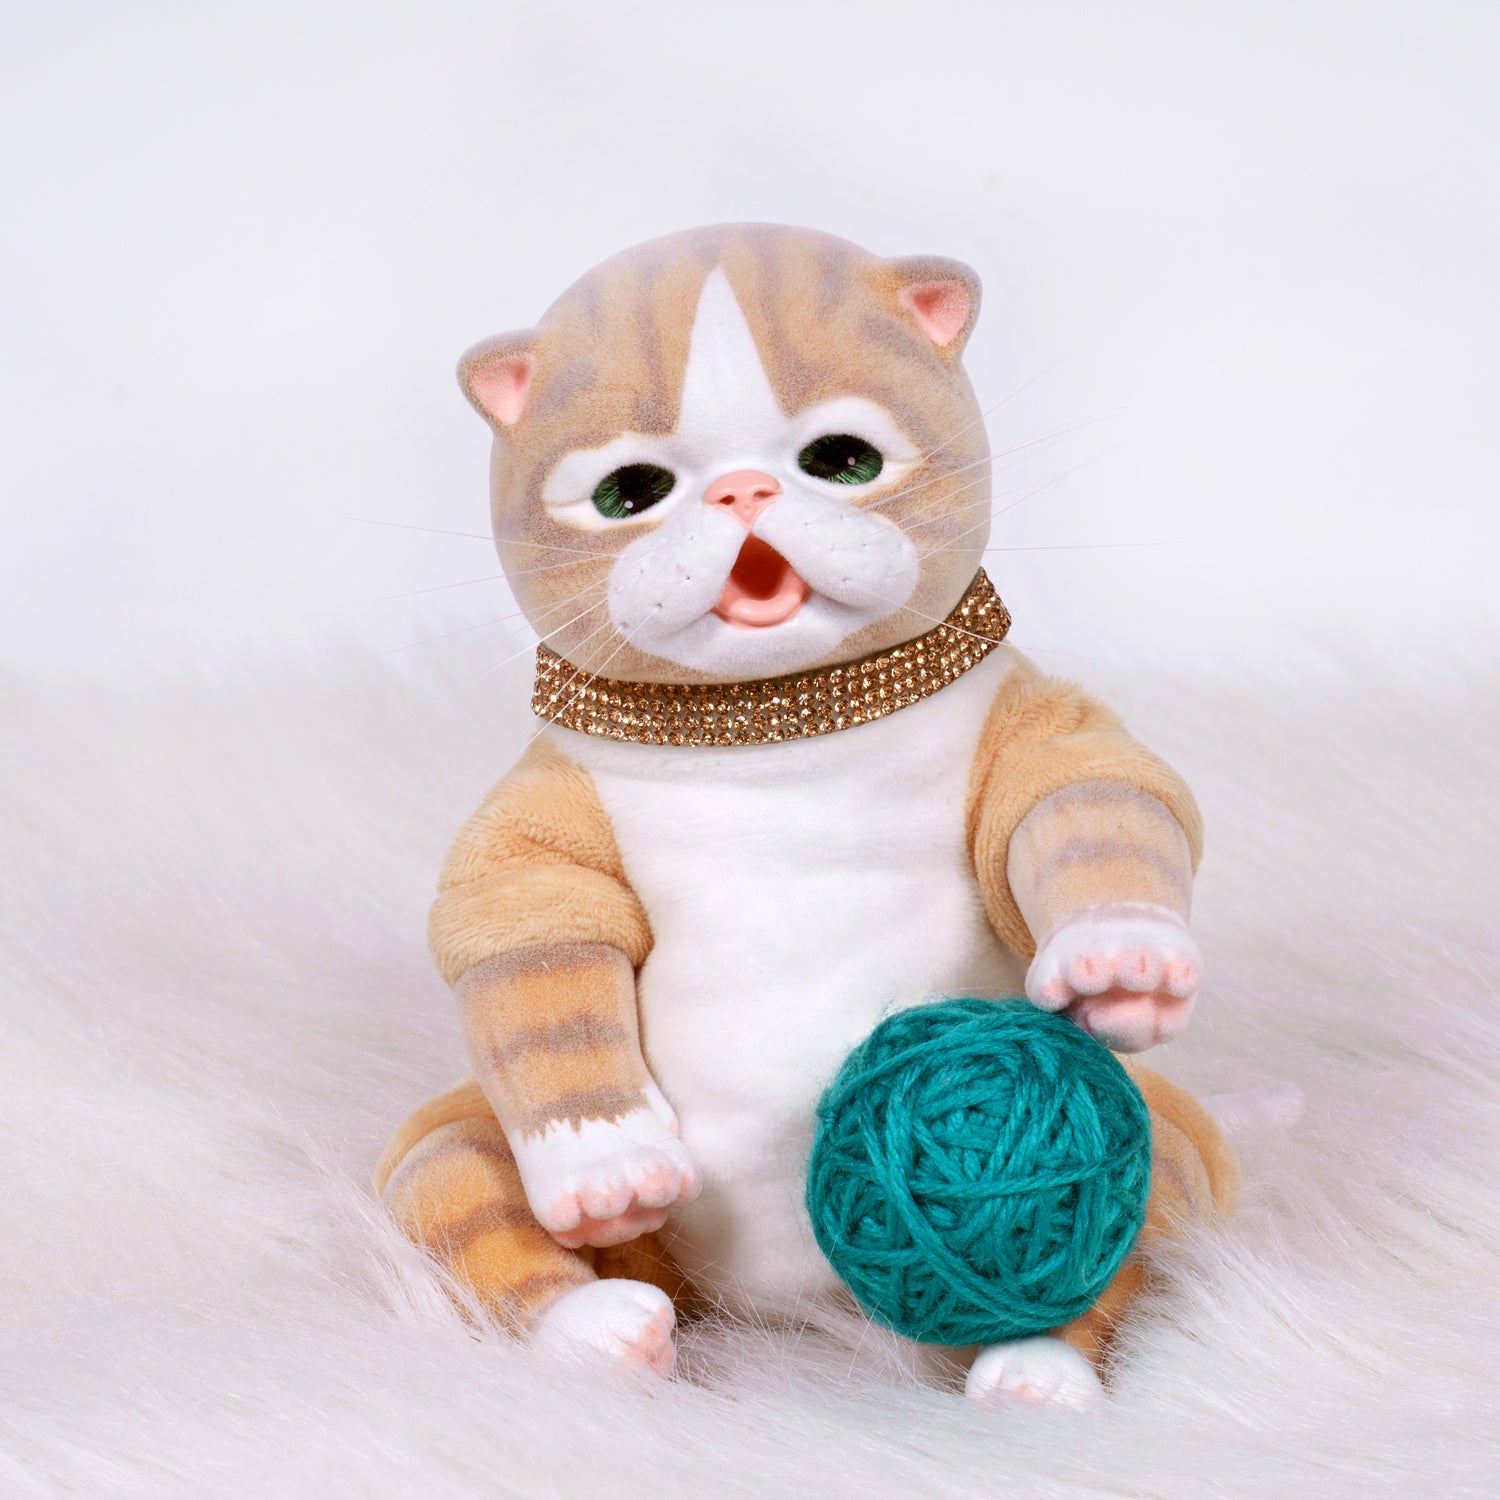 9-inch realistic Baby Orange Tabby Kitten doll inspired by an American Shorthair kitten. Sculpted by world-renowned artist Ping Lau, the Furever Babies Kitten collection by PG is made from our premium vinyl that is flocked for a velvety finish and a weighted plush body for that wonderfully lifelike feel